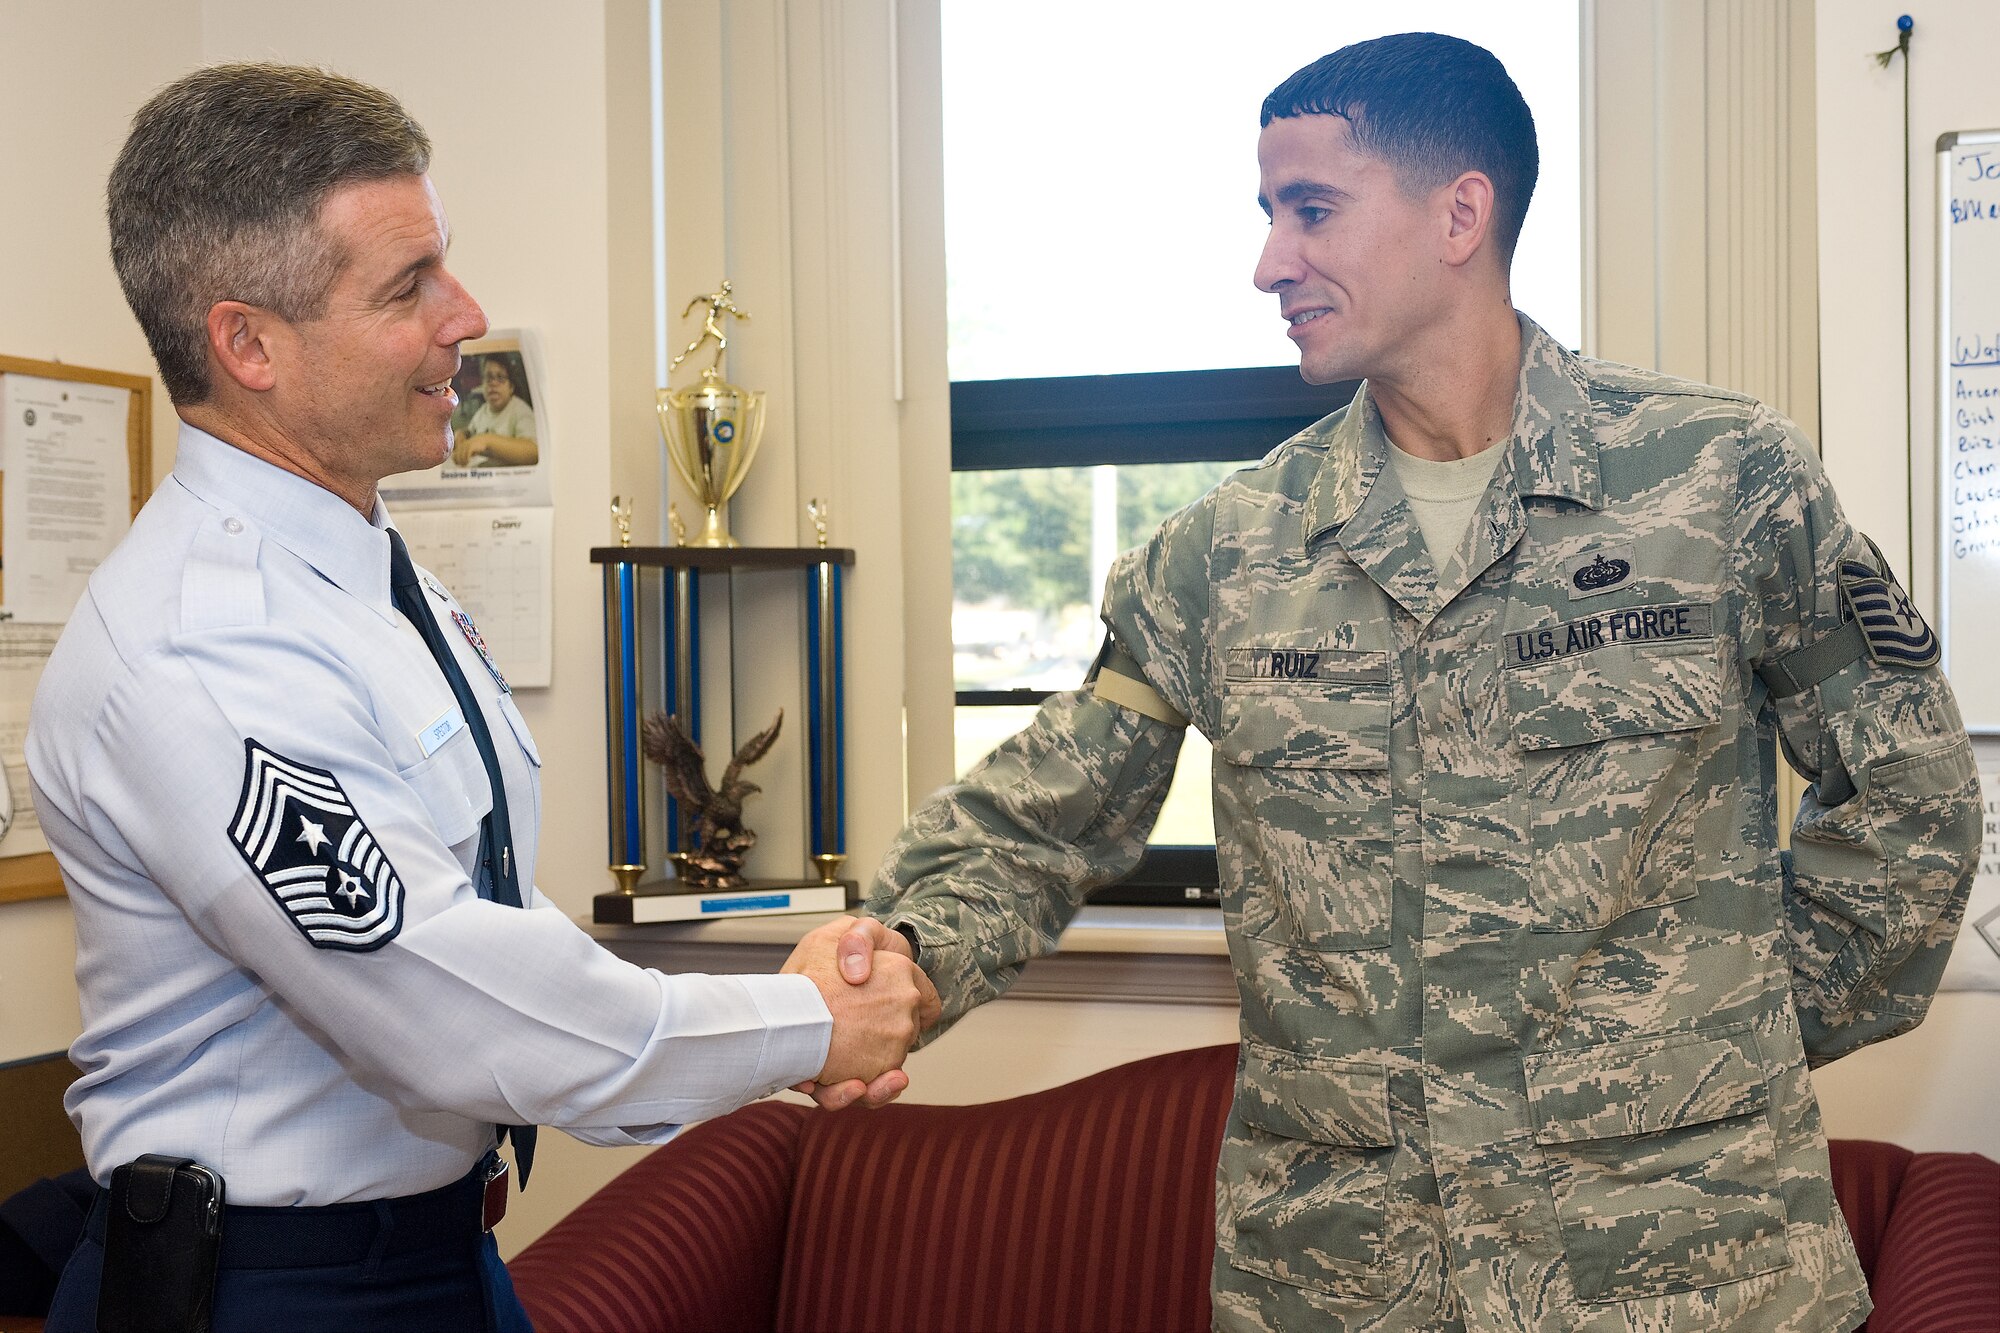 Chief Master Sgt. David E. Spector, Command Chief Master Sergeant for Air Mobility Command, congratulates Tech. Sgt. Alex Ruiz on Sept. 20, 2010, at Dover Air Force Base, Del., after Sergeant Ruiz was promoted to technical sergeant through the Stripes for Exceptional Performers program by Col. Manson Morris, 436th Airlift Wing commander. (U.S. Air Force Photo/Mr. Roland Balik)